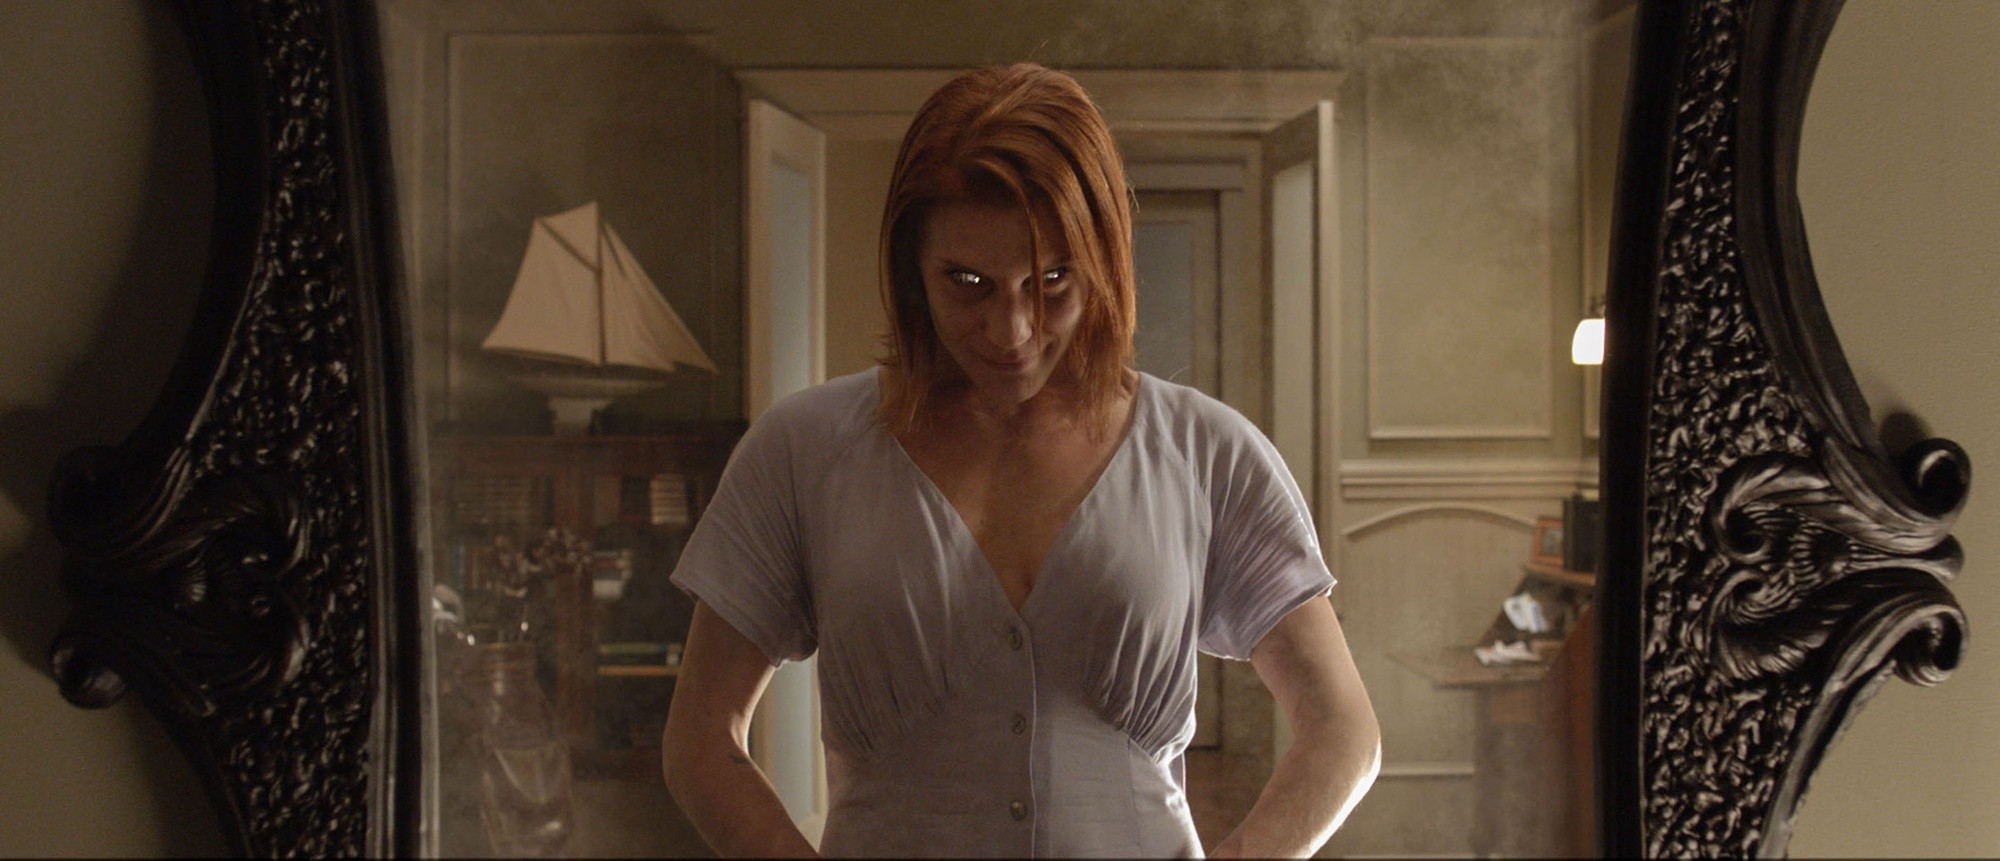 Katee Sackhoff stars as	Marie Russell  in Relativity Media's Oculus (2014). Photo credit by John Estes.